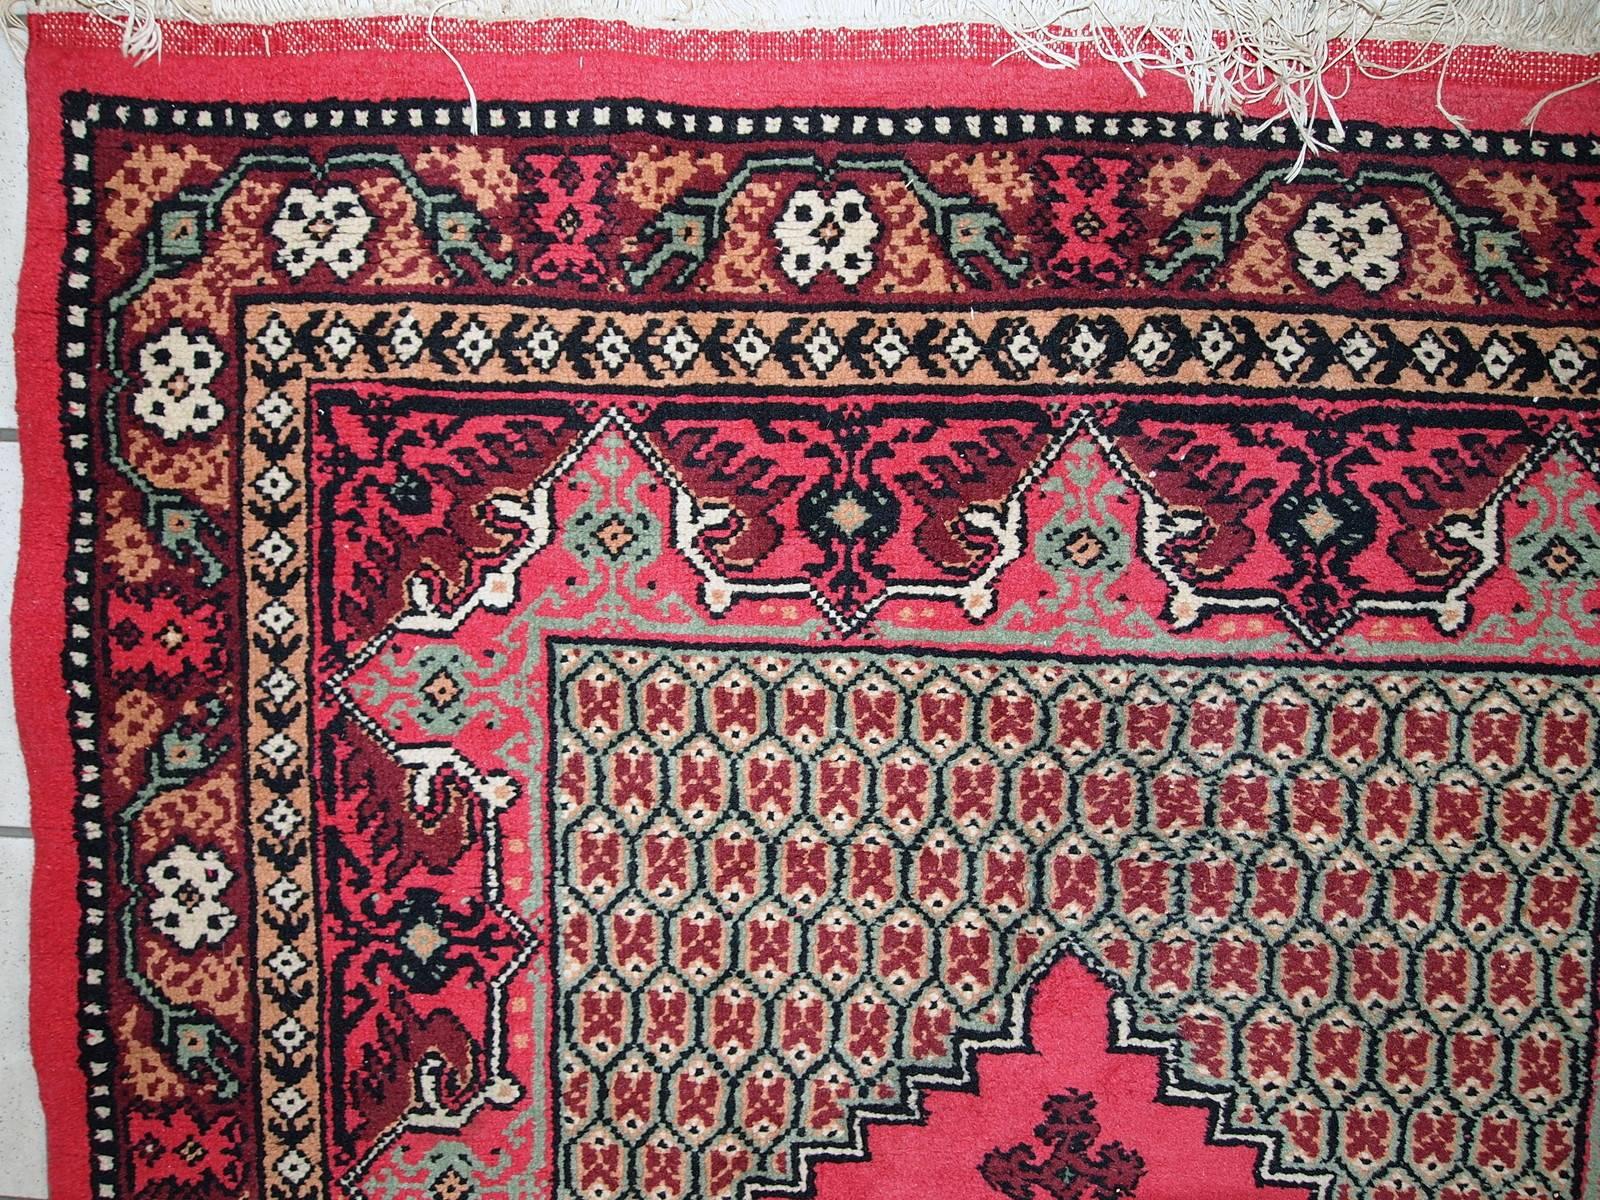 Vintage Algerian Berber rug in original condition. The rug has traditional Berber design with the large diamond shaped medallion in the centre in pink color. The deep burgundy border decorated in floral ornaments. The rug is in original good